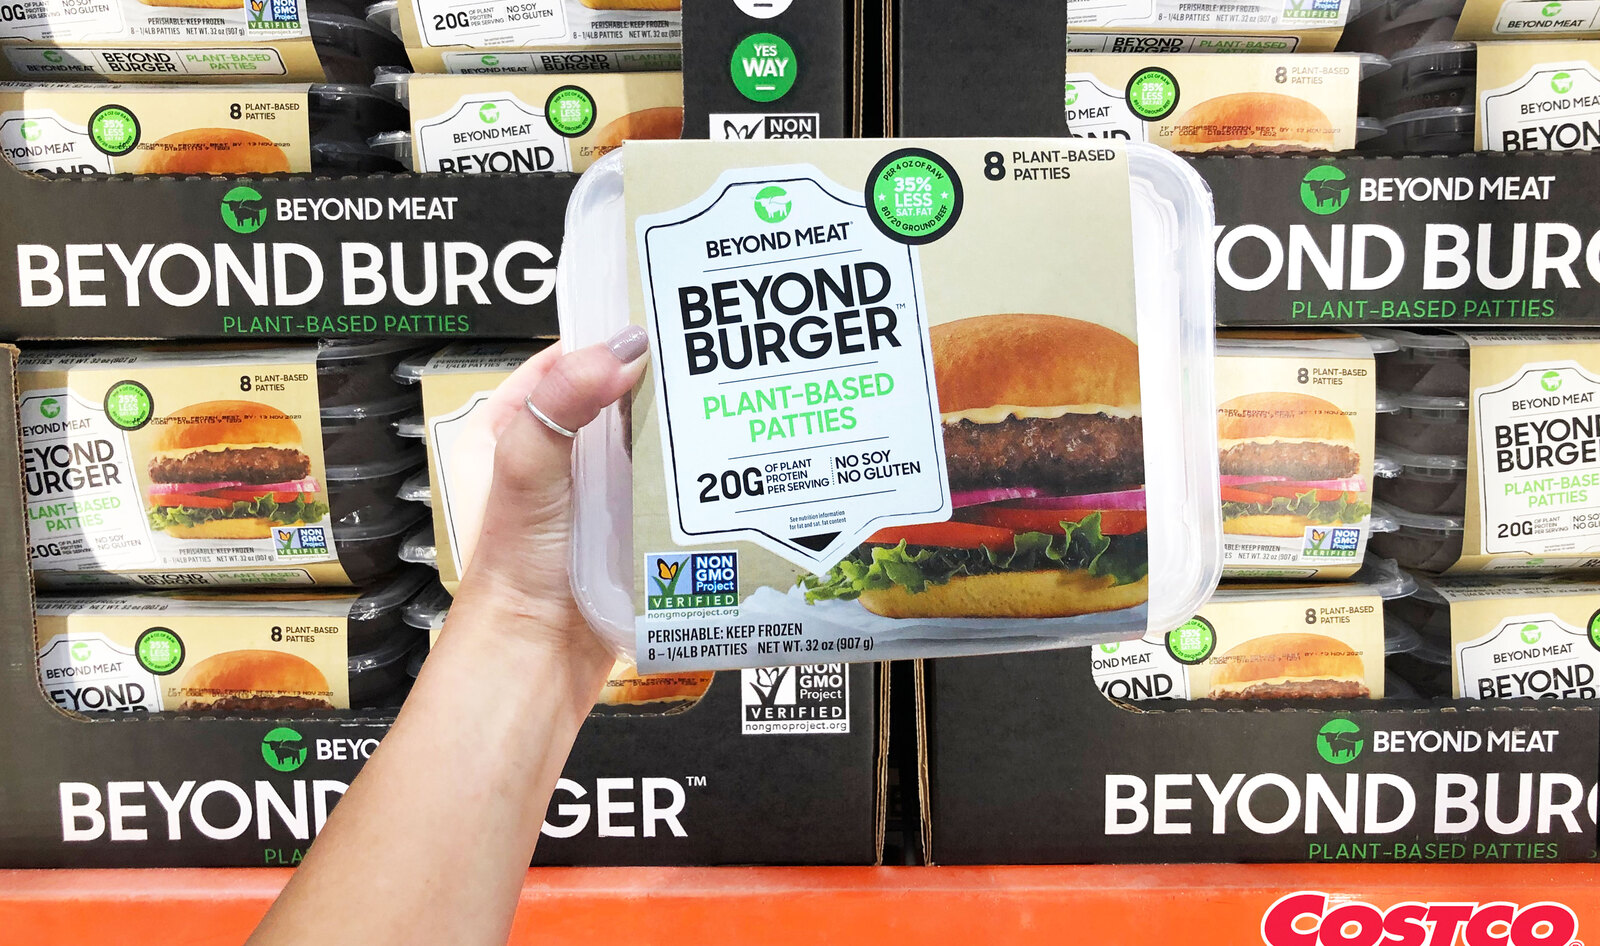 These 21 Vegan Costco Products Will Have You Signing up For a Membership ASAP